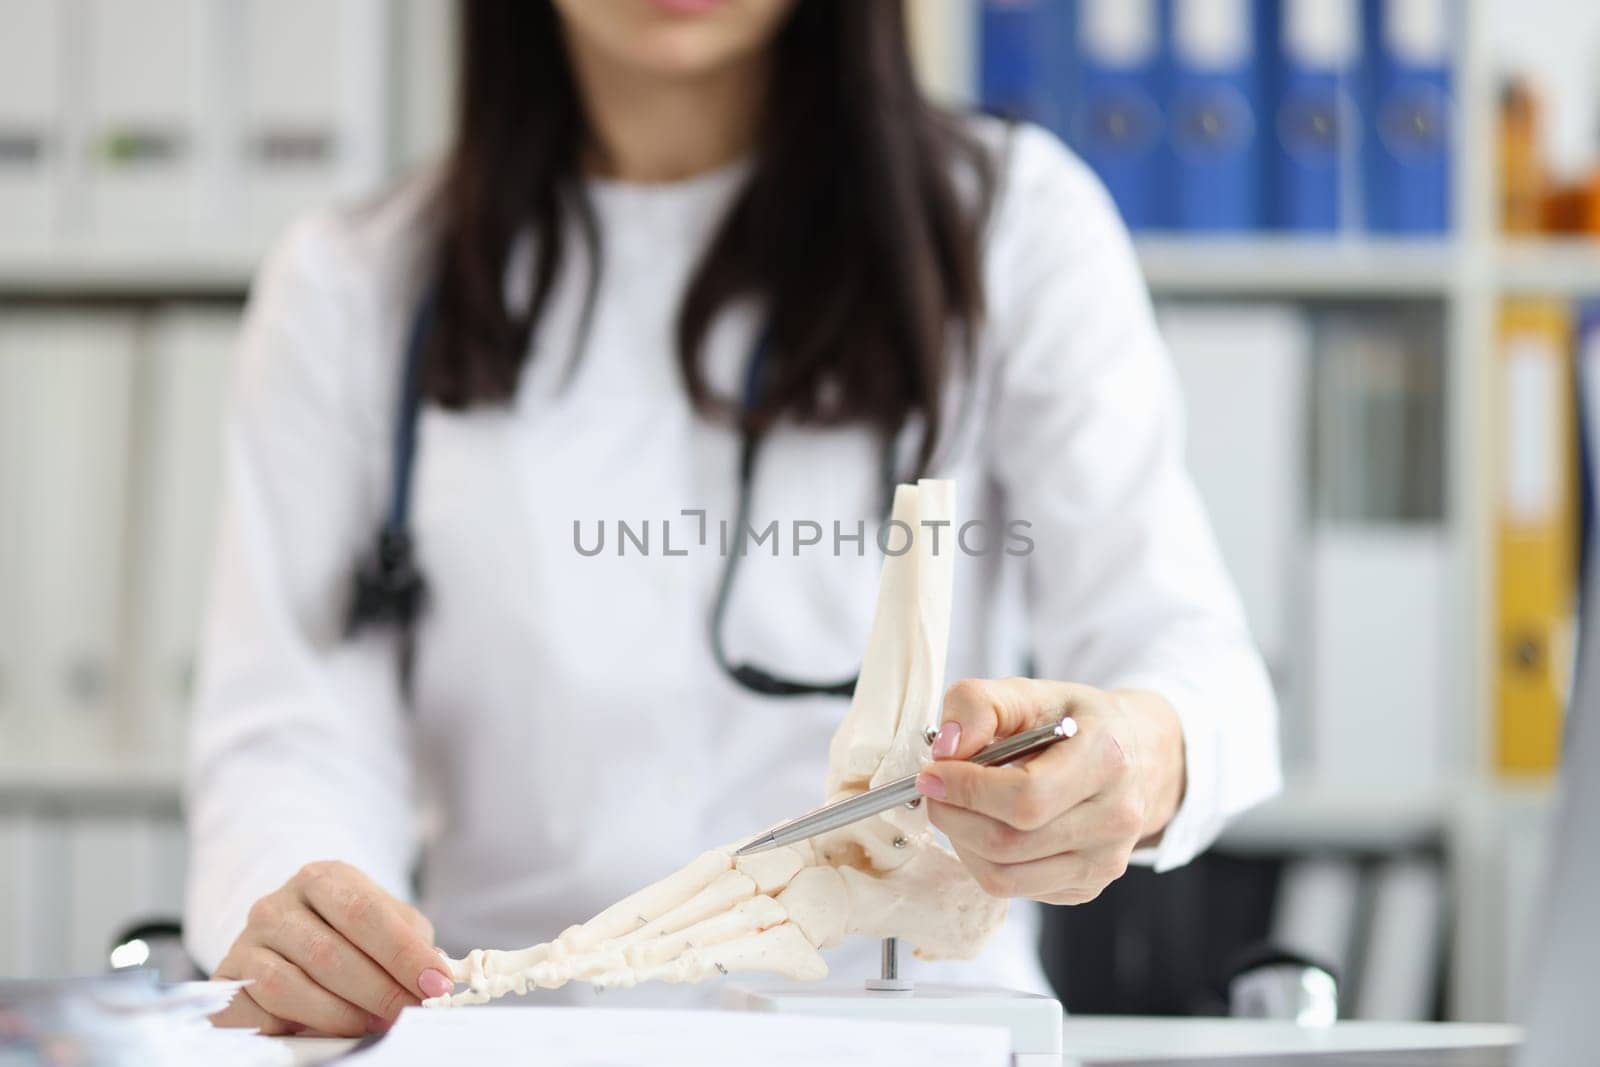 Orthopedic doctor explains physiology of bone model by pointing to point of model. Tell patient how to treat bone disease